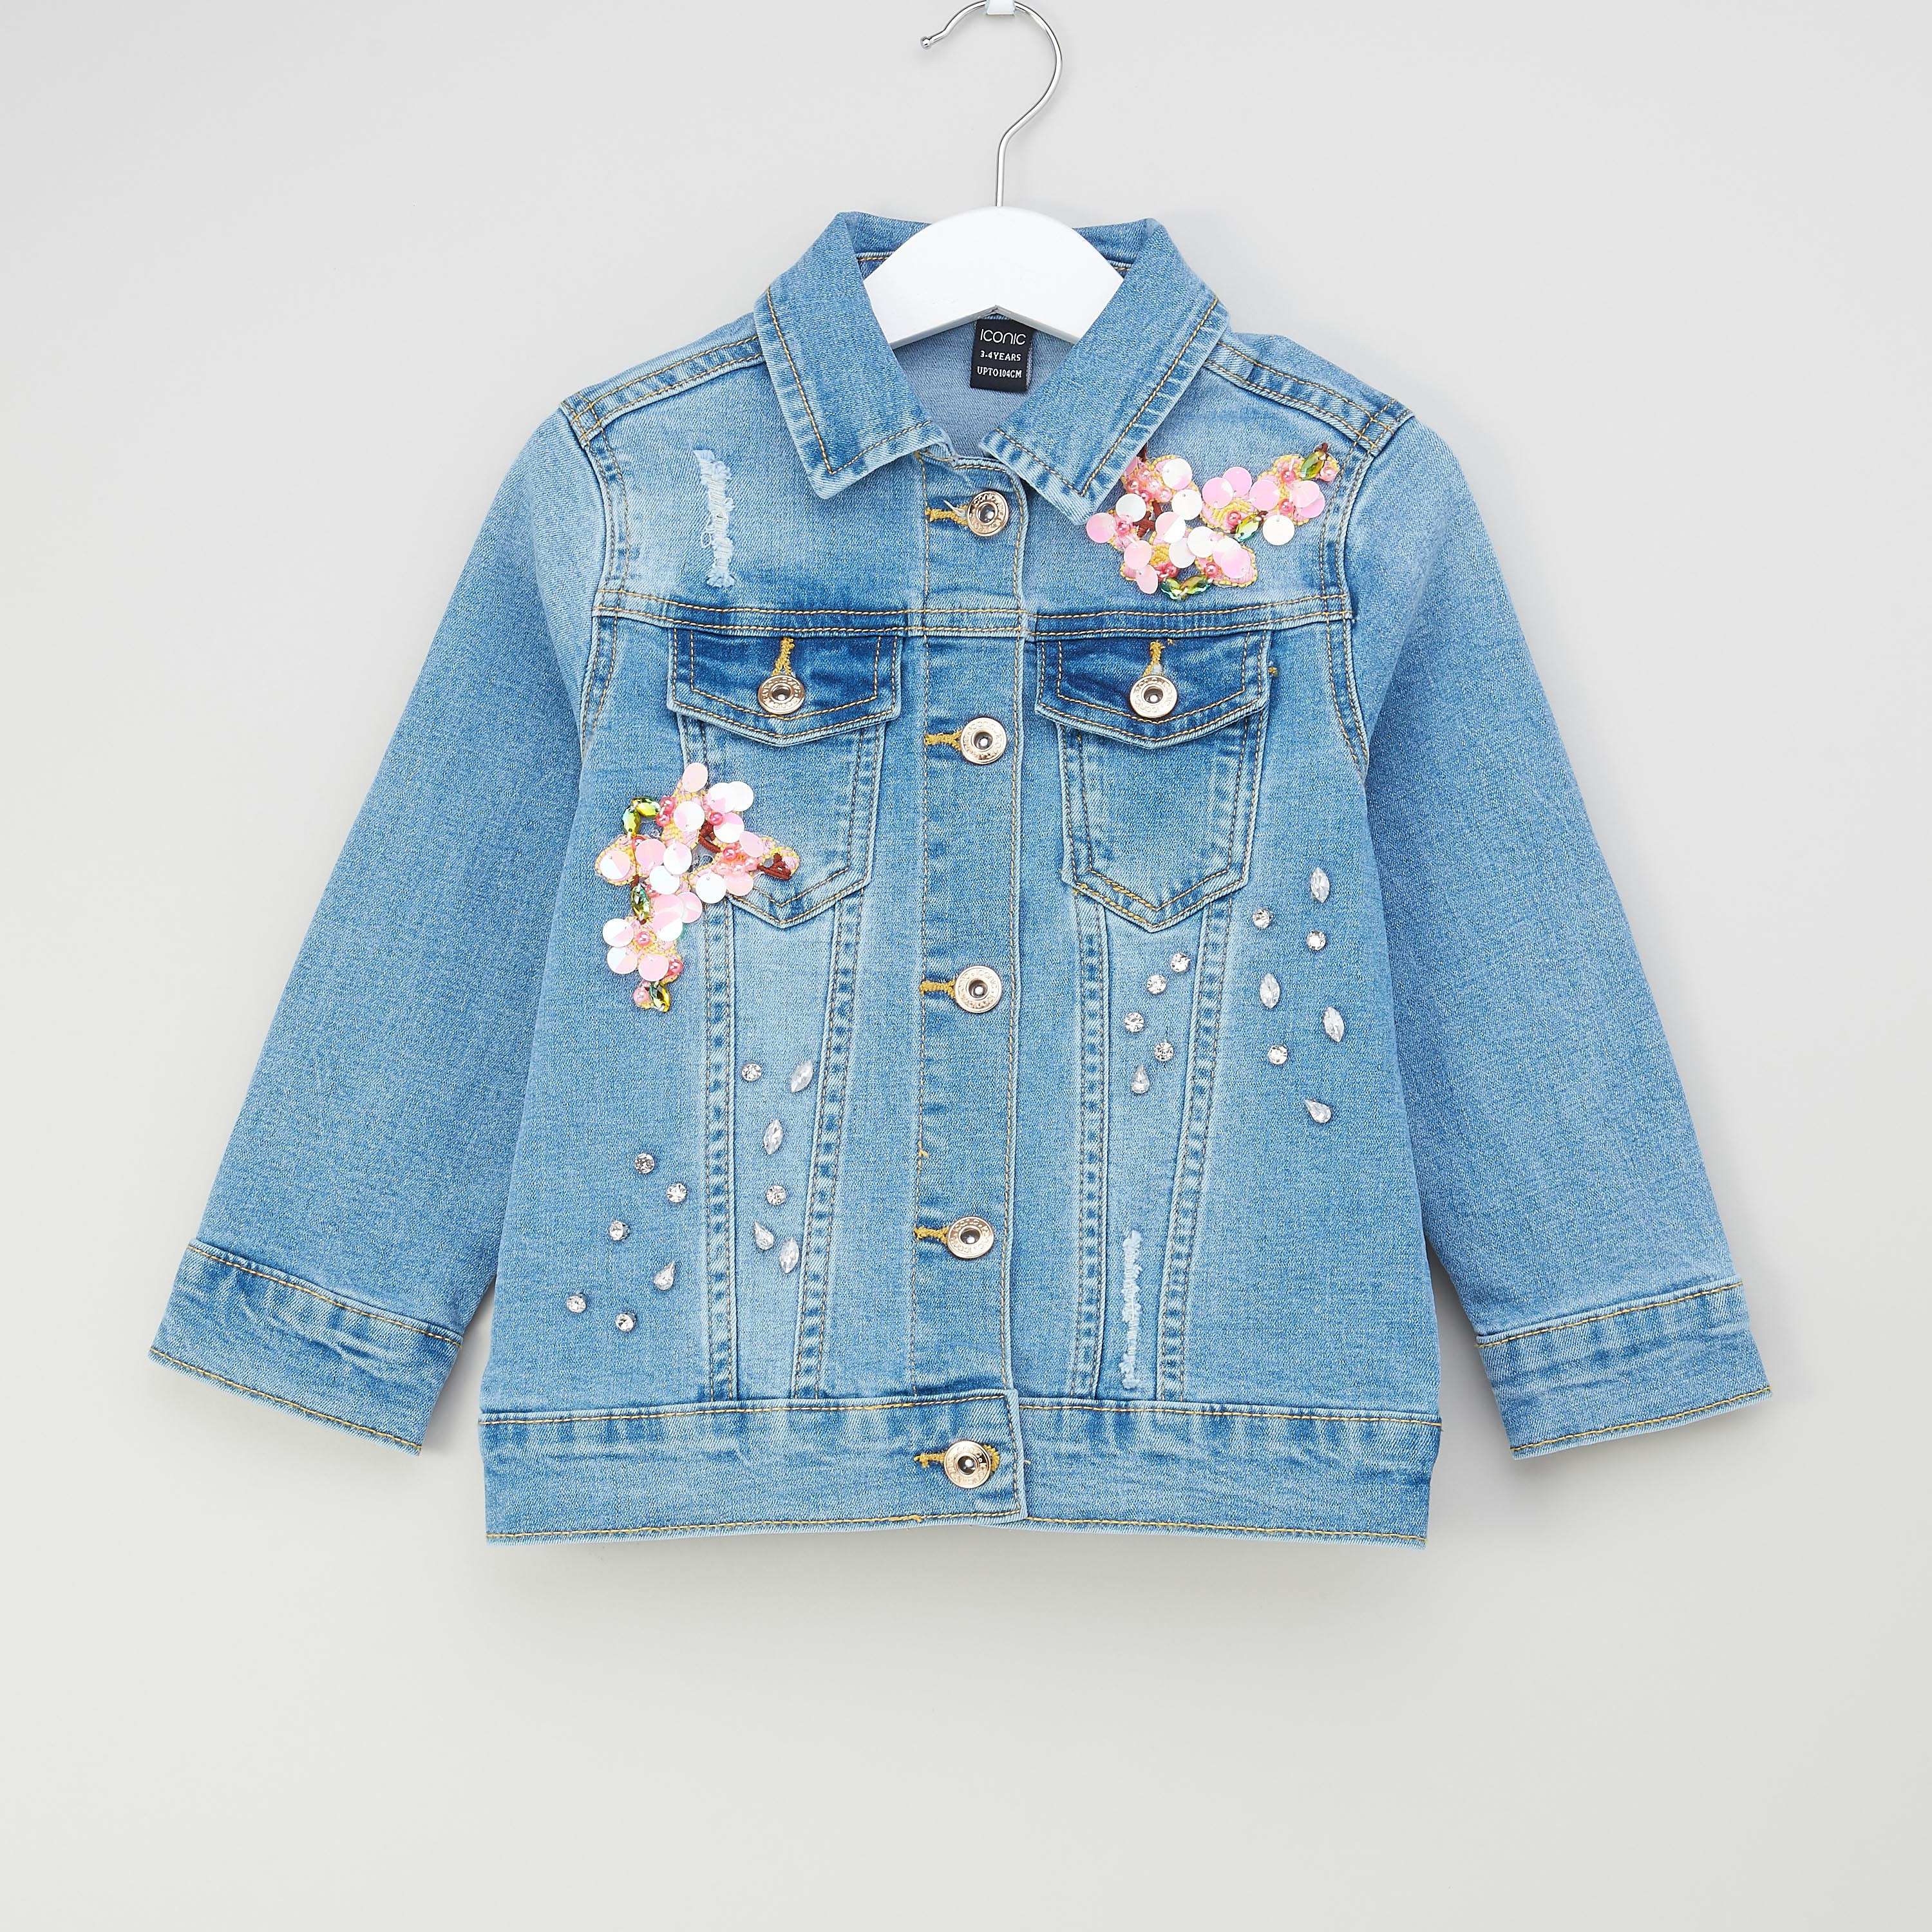 Elsy - Short Light Jeans Jacket For Girls And Teen - annameglio.com shop  online